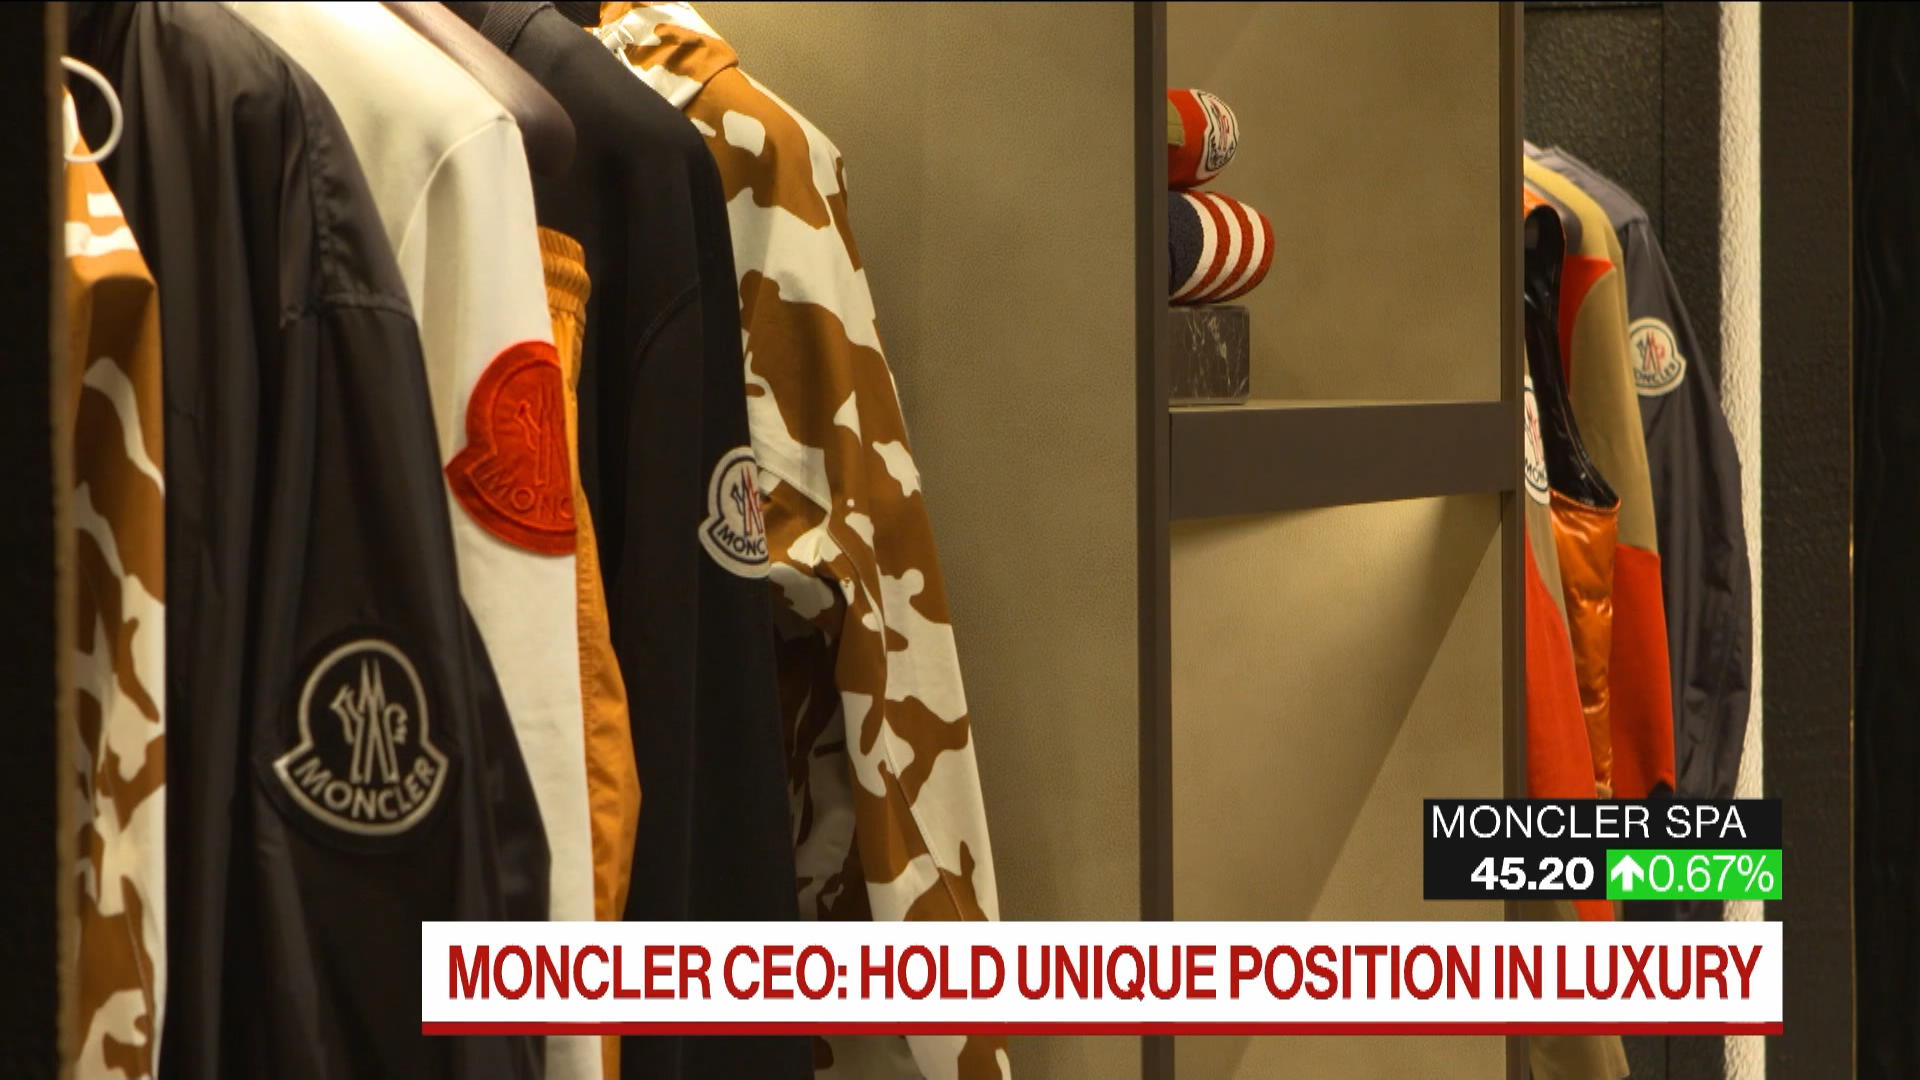 Stone Island Is Acquired by Moncler for $1.39 Billion